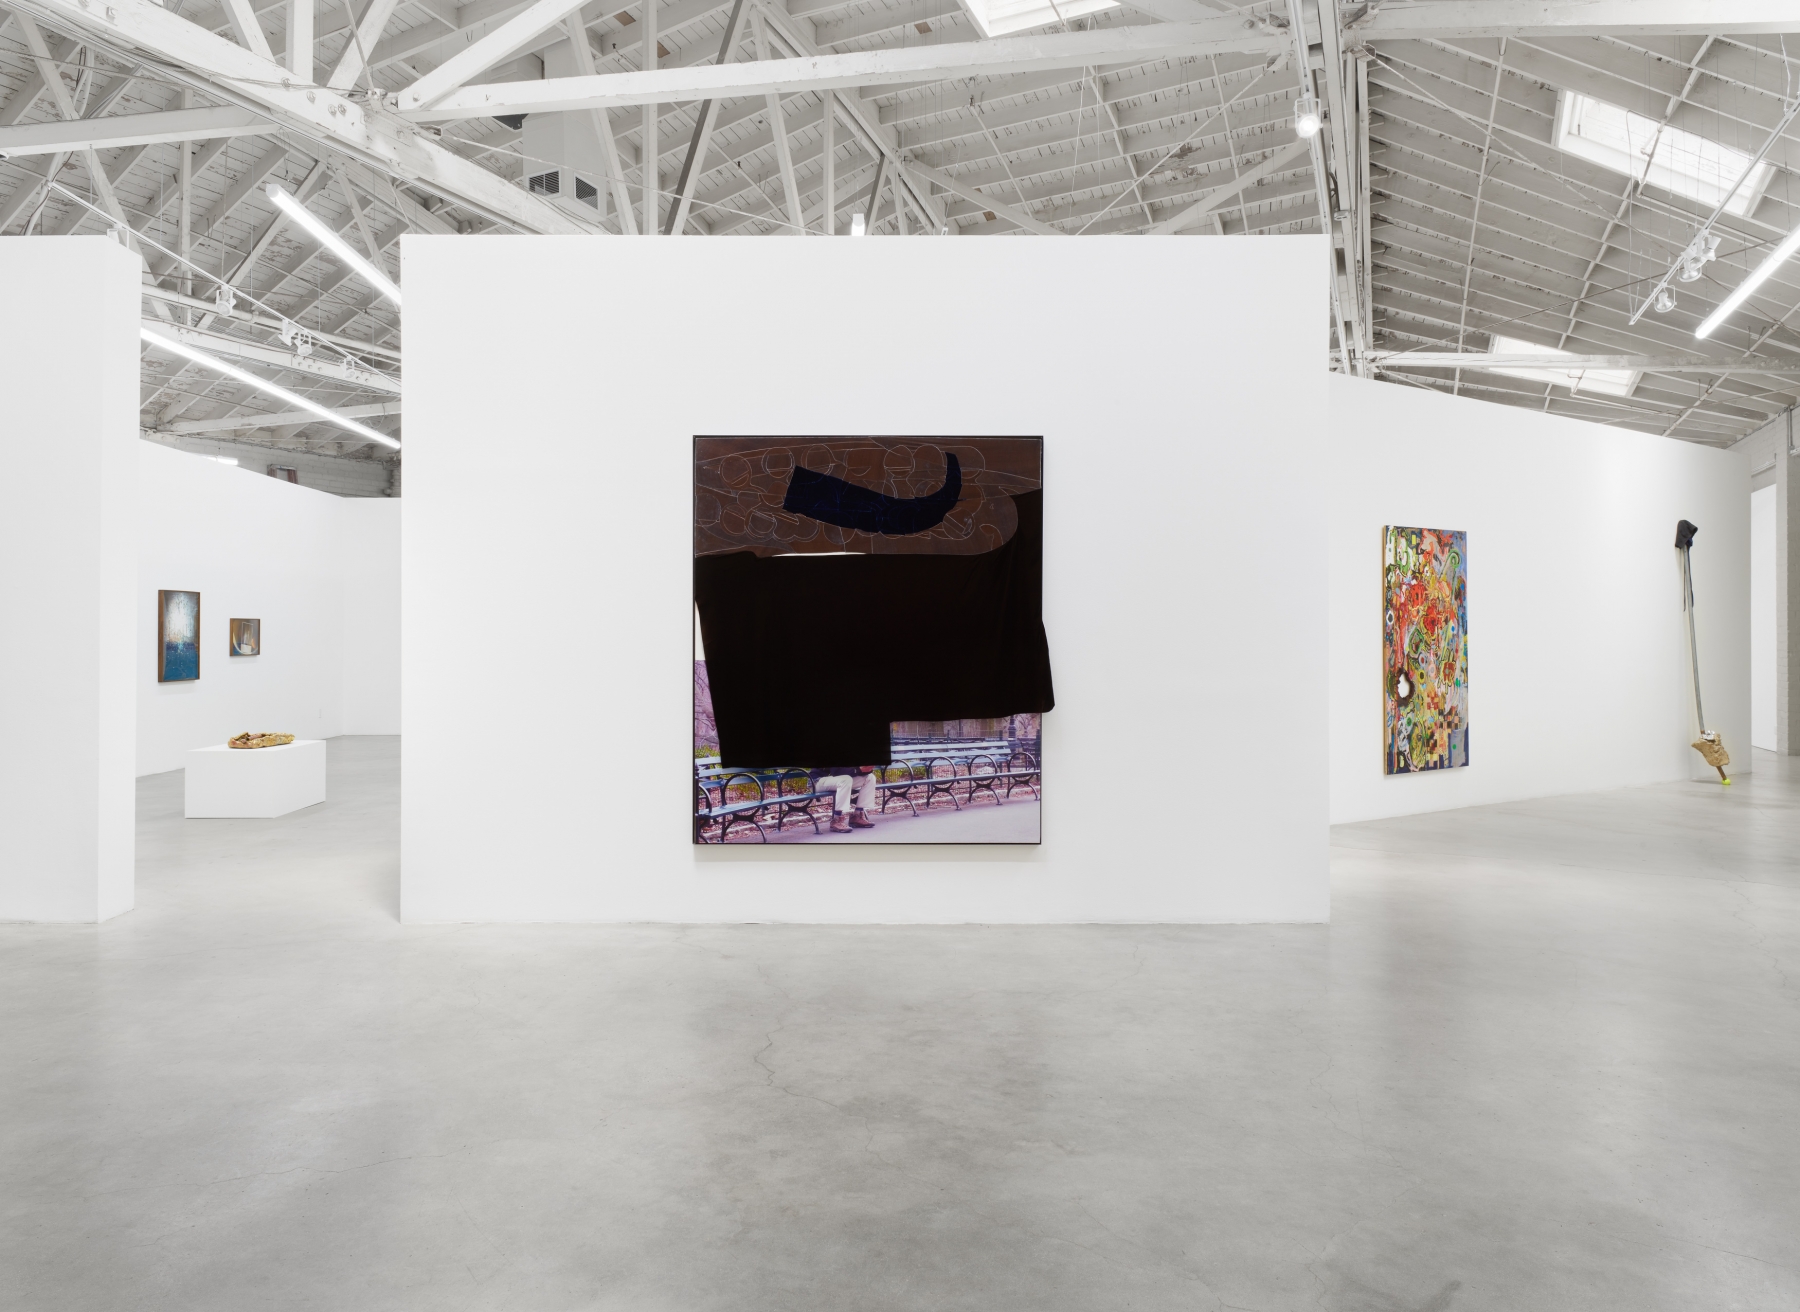 Installation view of Majeure Force, Part Two, featuring works by Melanie Schiff, Sterling Ruby, Rose Marcus, JPW3, and Daniel T. Gaitor-Lomack.